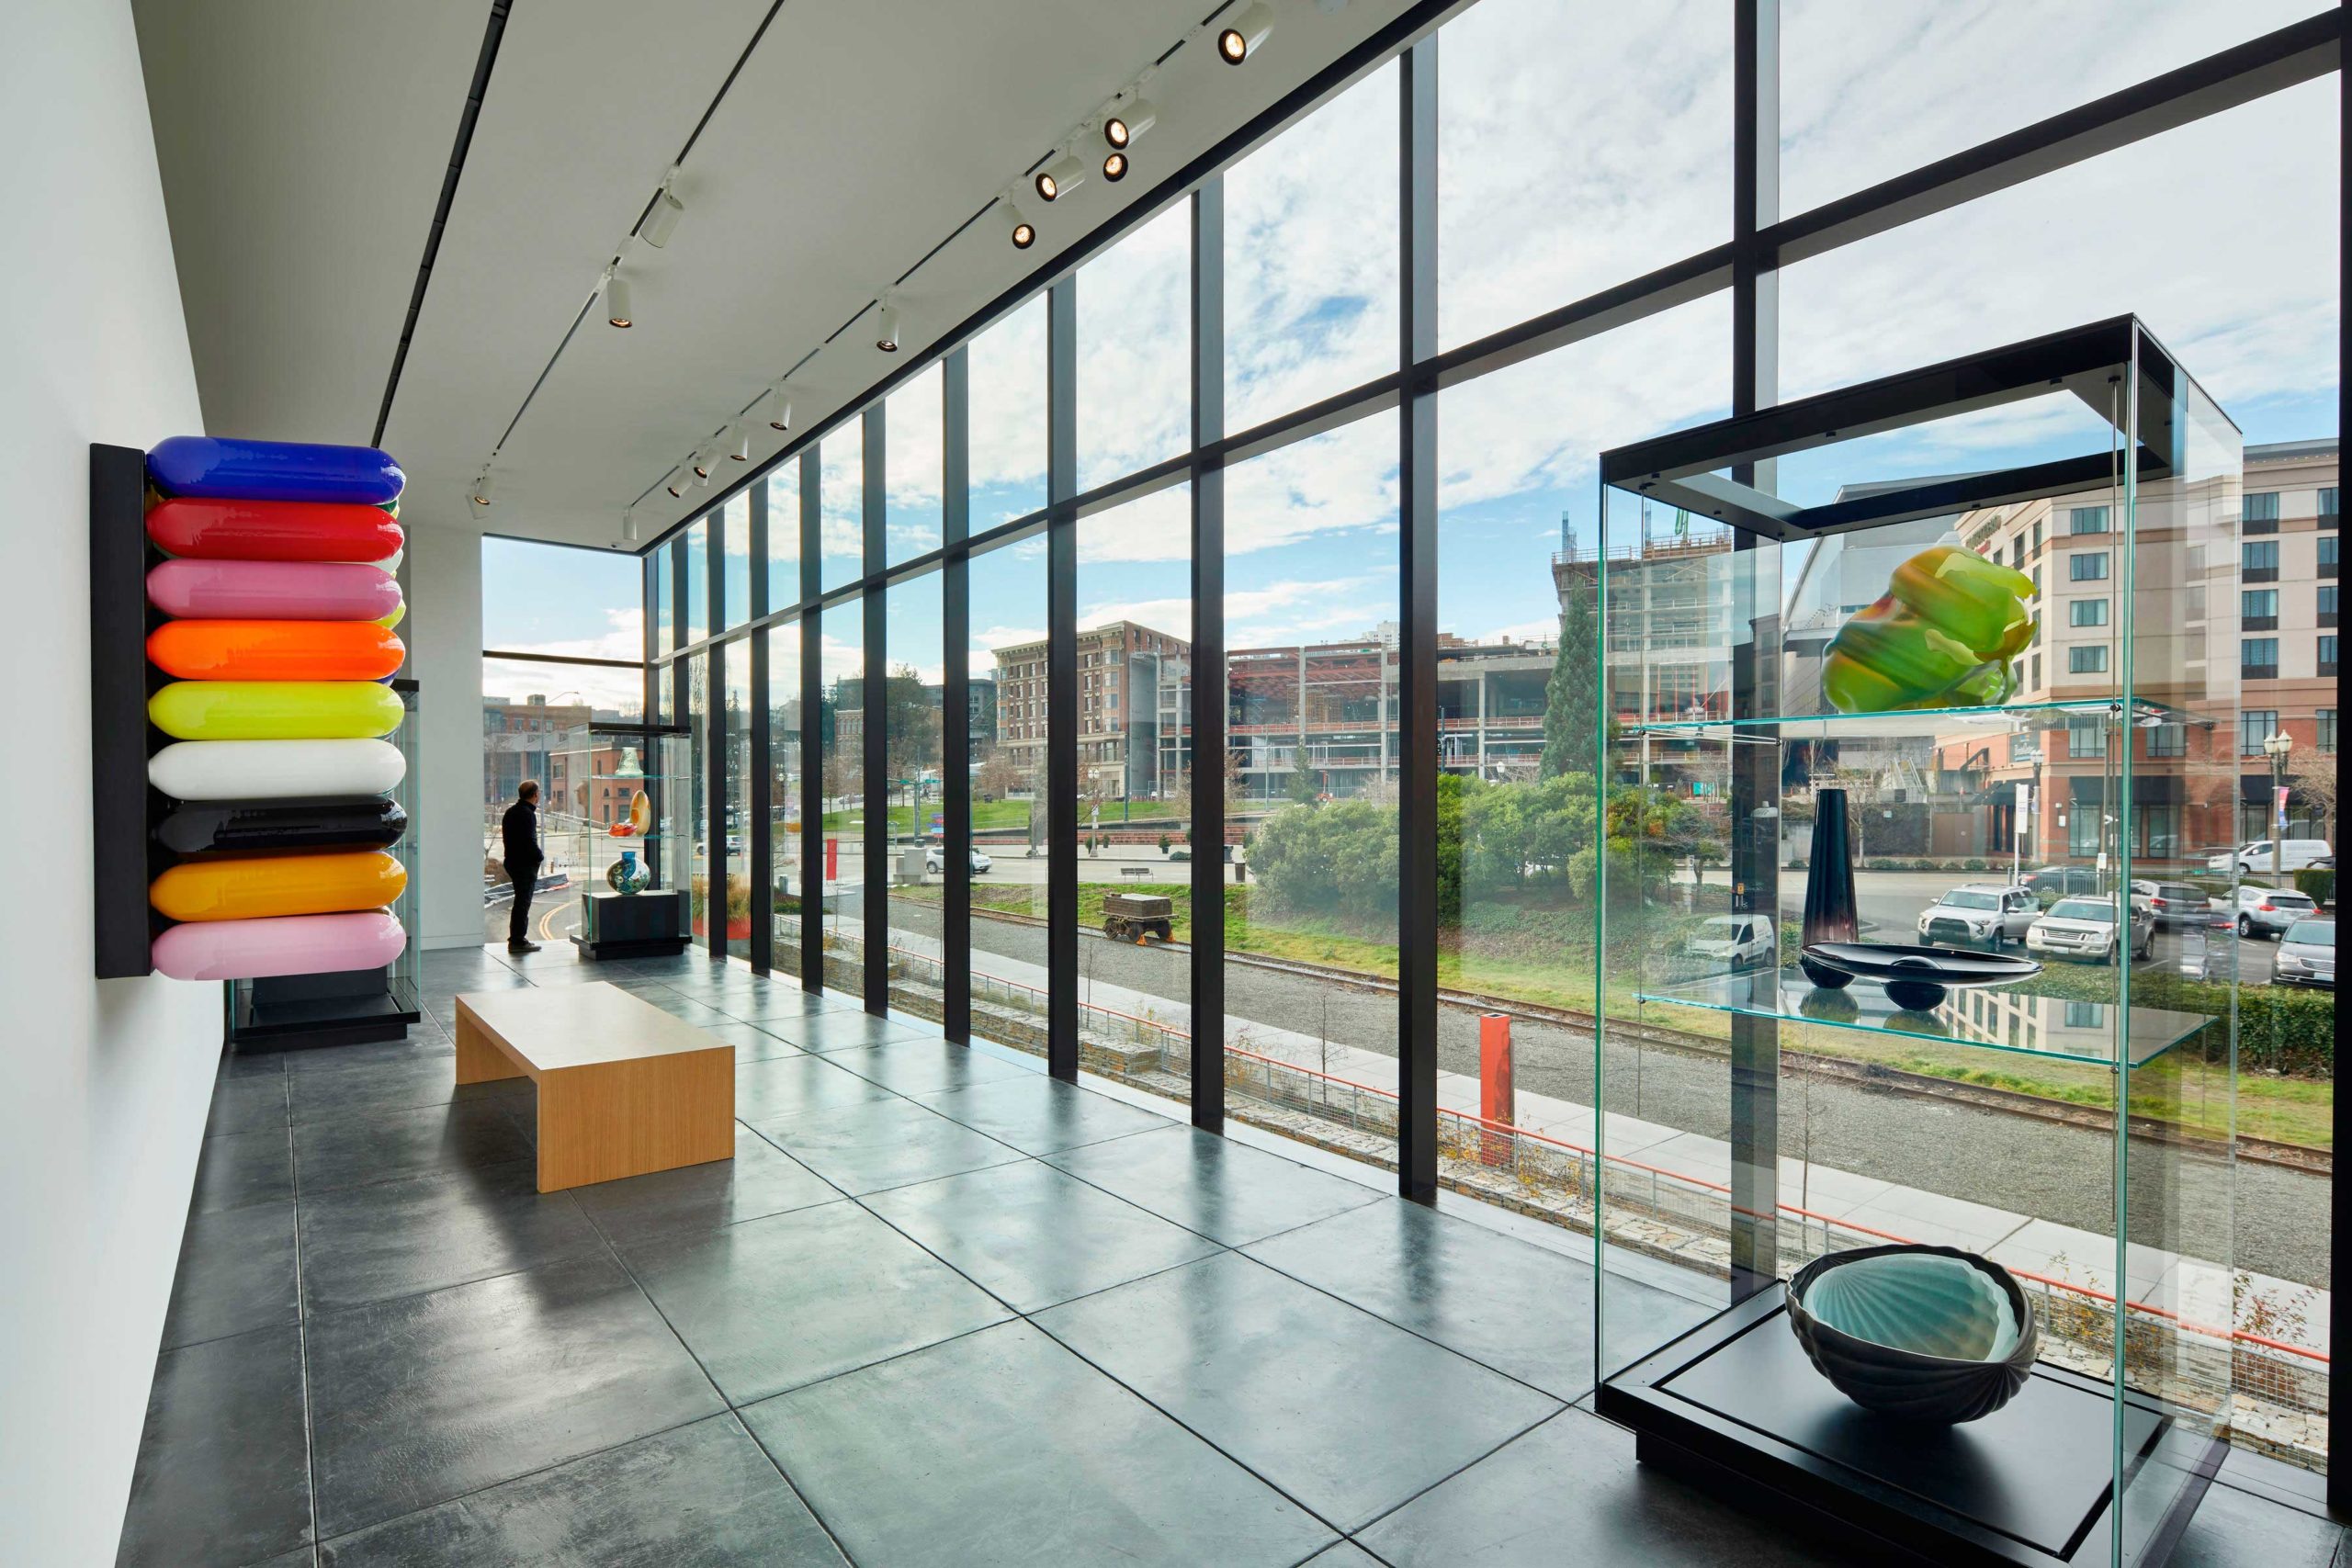 The new Benaroya Wing is accessible to - and cut off from - a historic corner  of Tacoma by, yes sheets of glass, that separate even as they connect.         Photo courtesy of Tacoma Art Museum